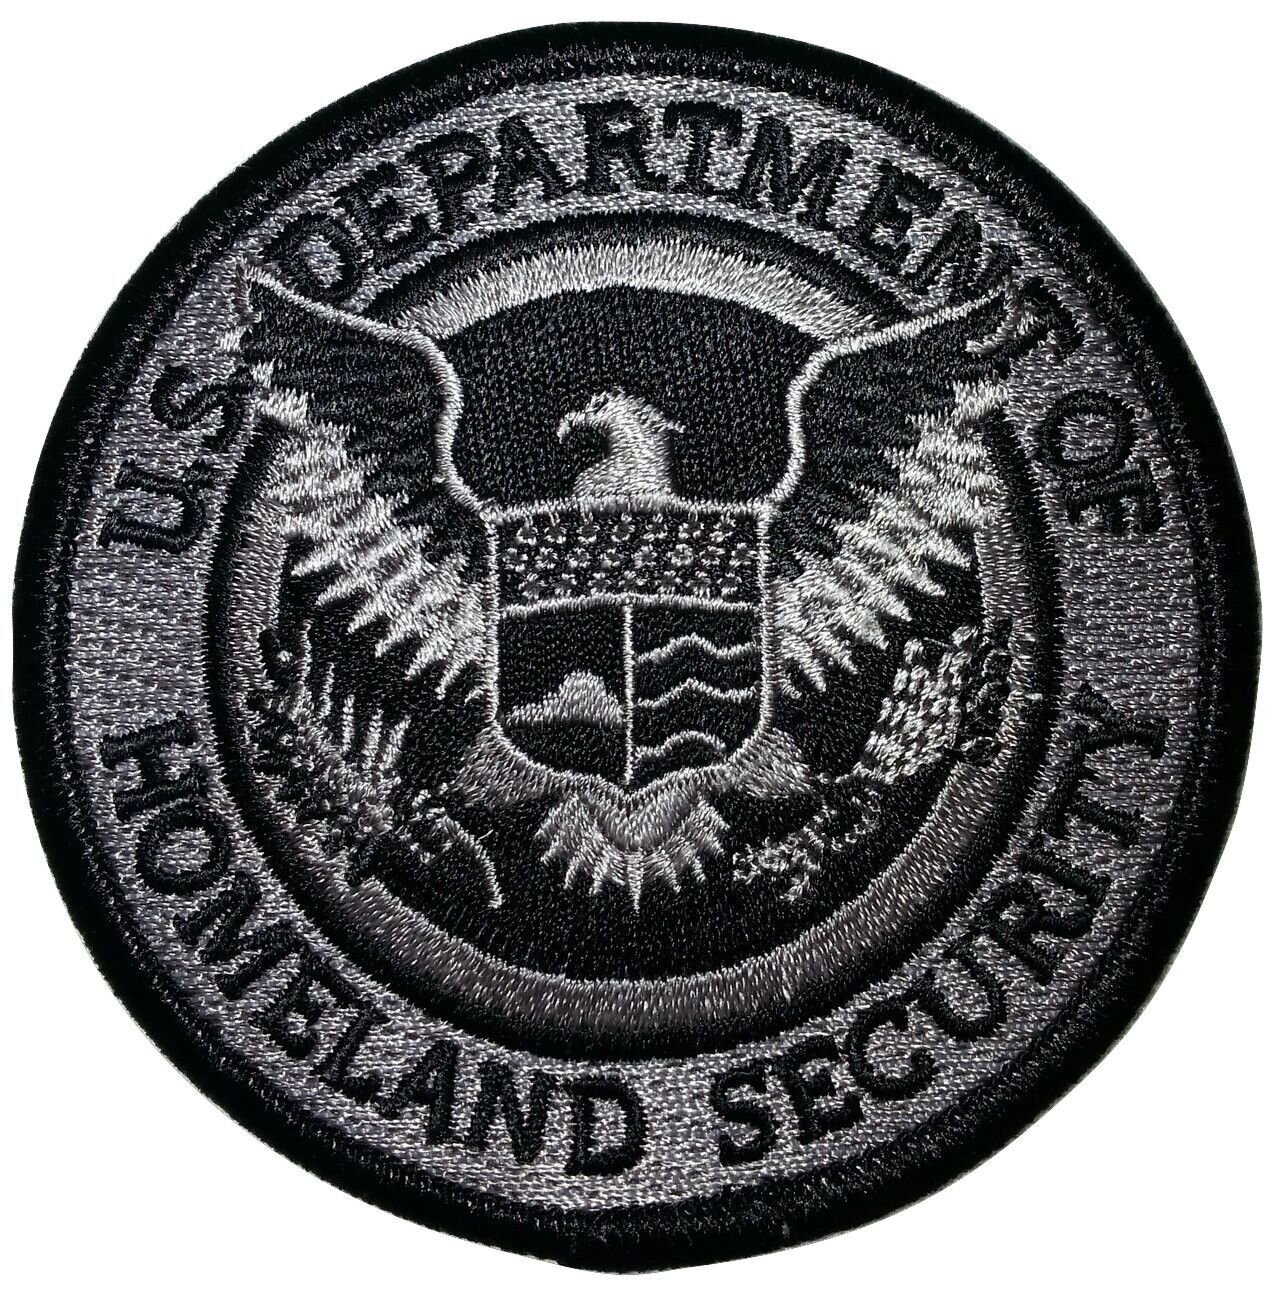 DHS Black/Grey Subdued Patch